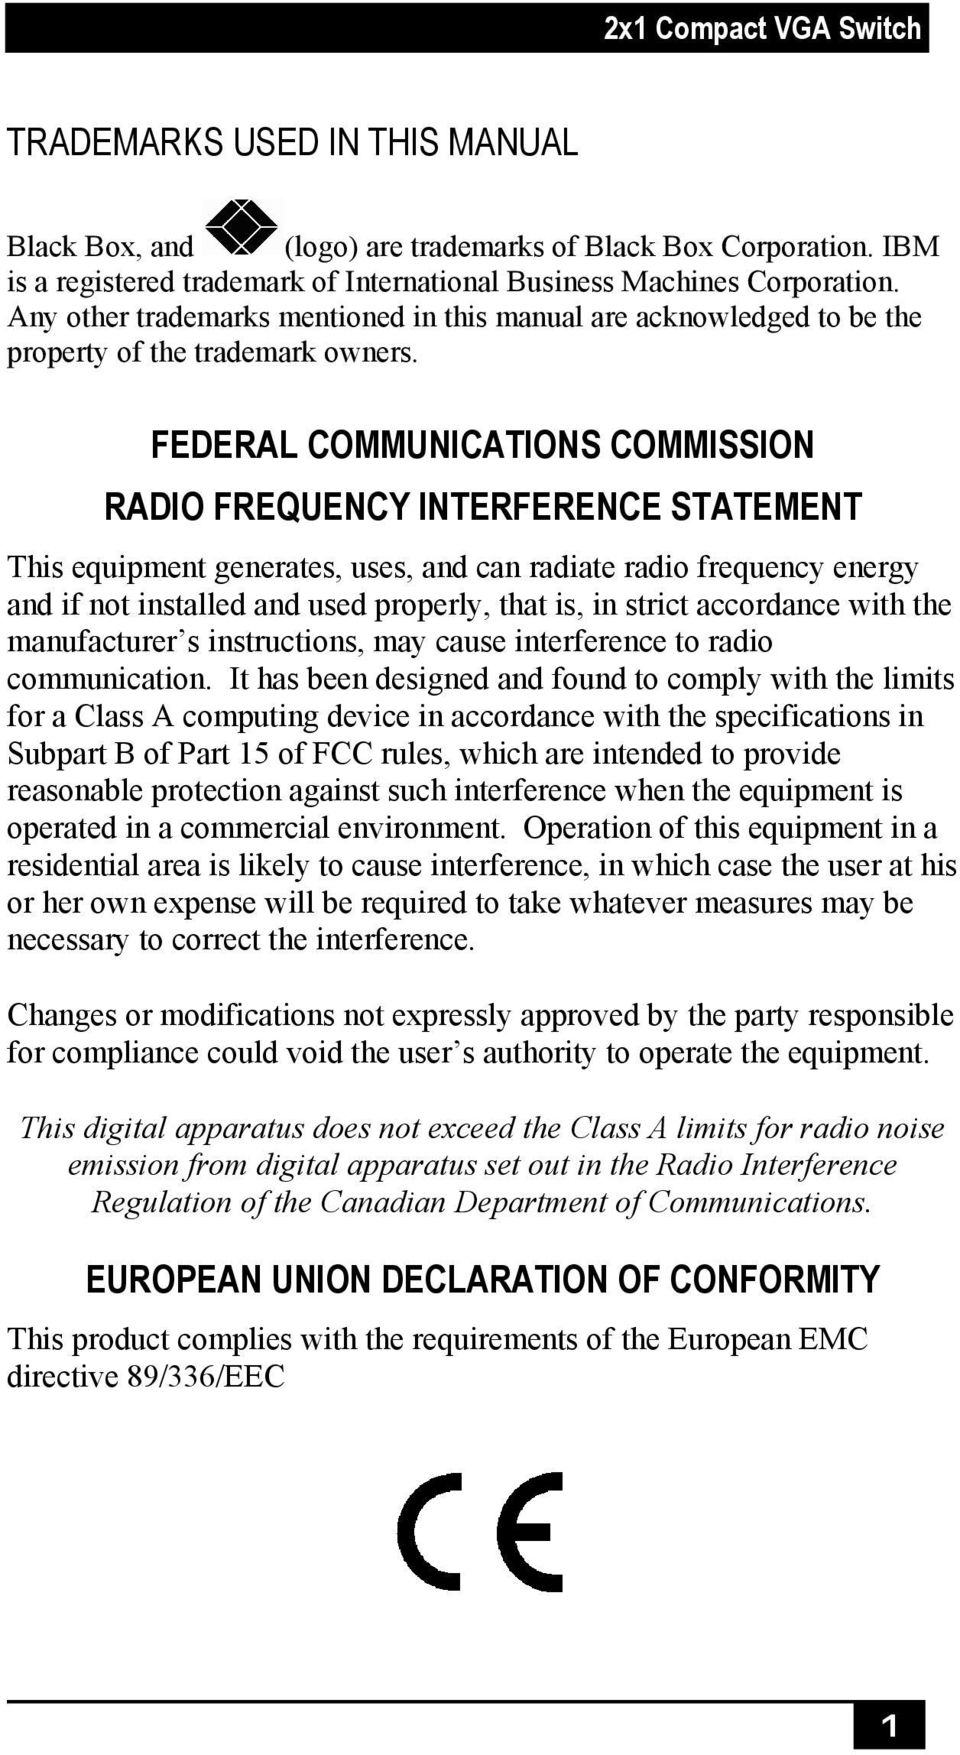 FEDERAL COMMUNICATIONS COMMISSION RADIO FREQUENCY INTERFERENCE STATEMENT This equipment generates, uses, and can radiate radio frequency energy and if not installed and used properly, that is, in